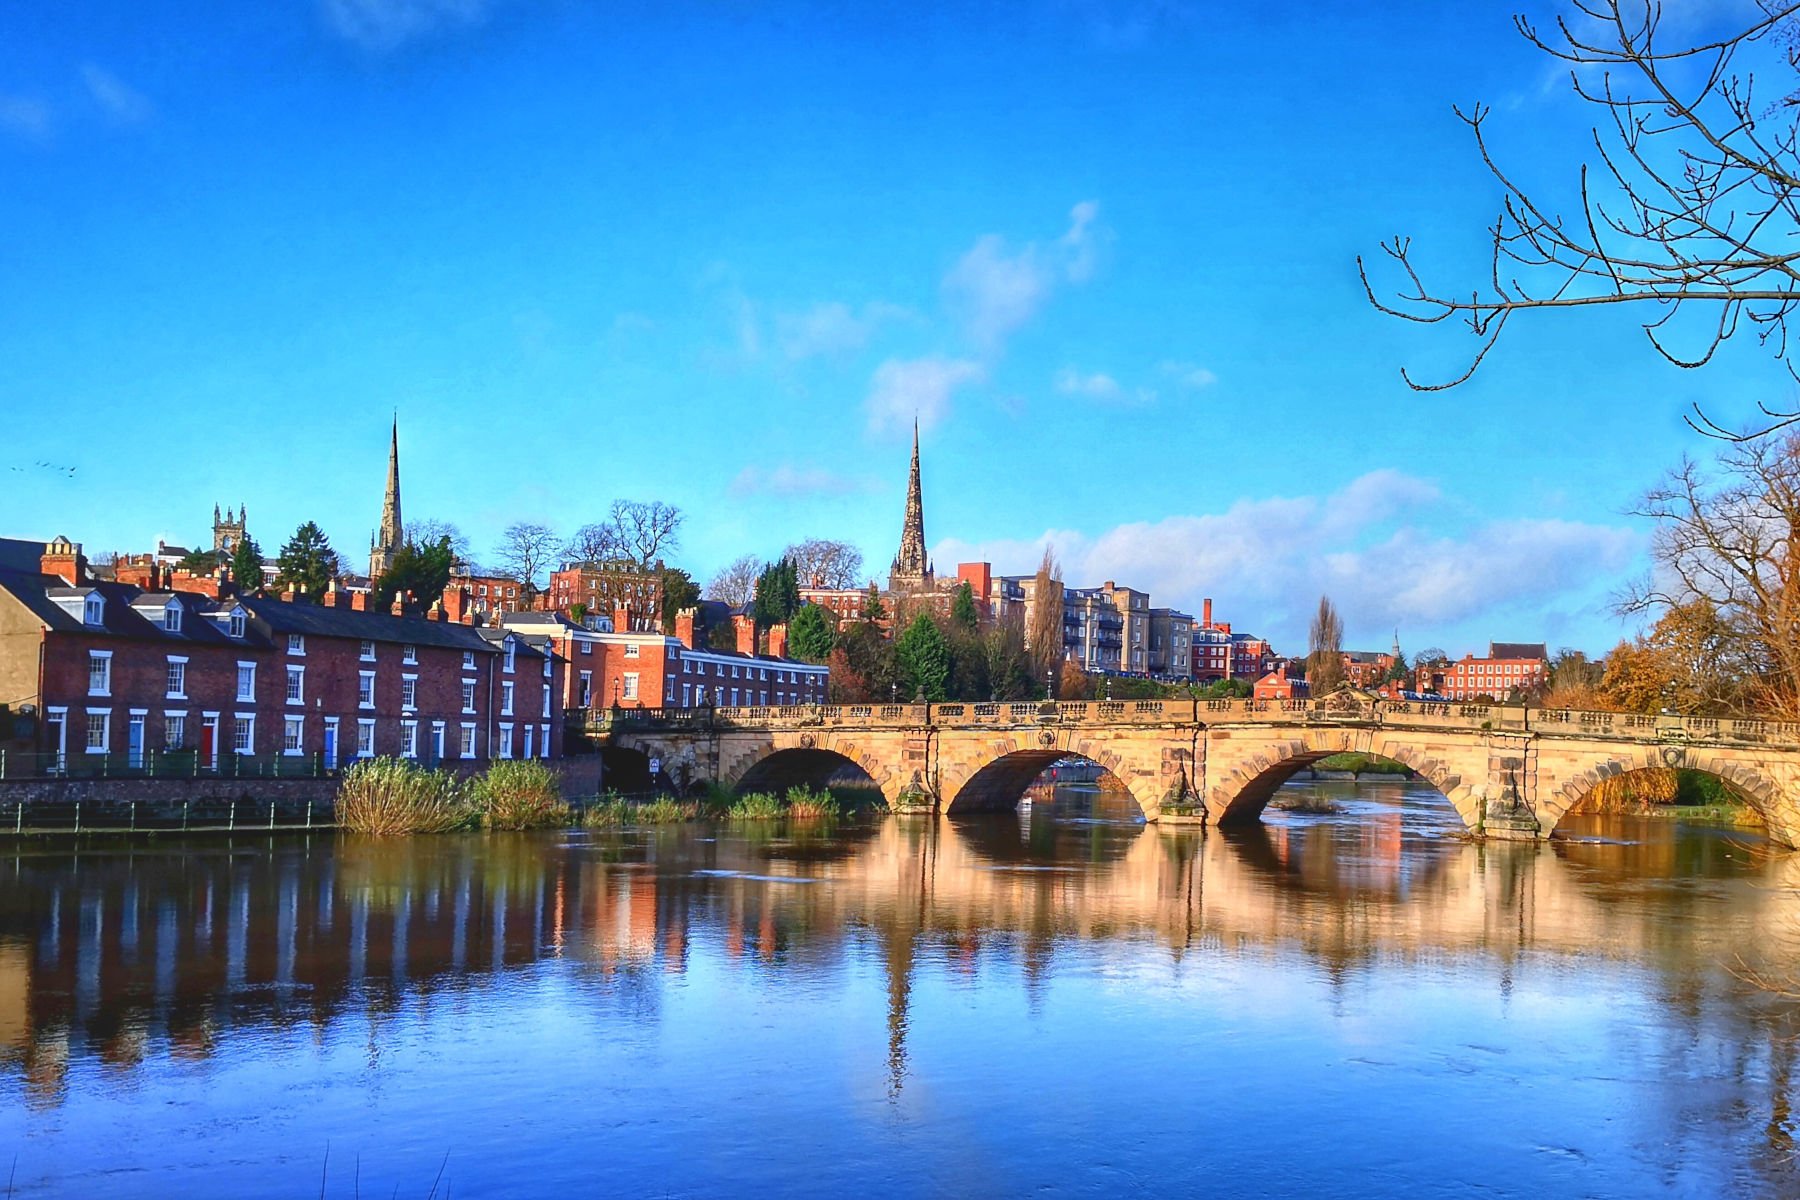 Shrewsbury town, home to our West Midlands marketing agency branch